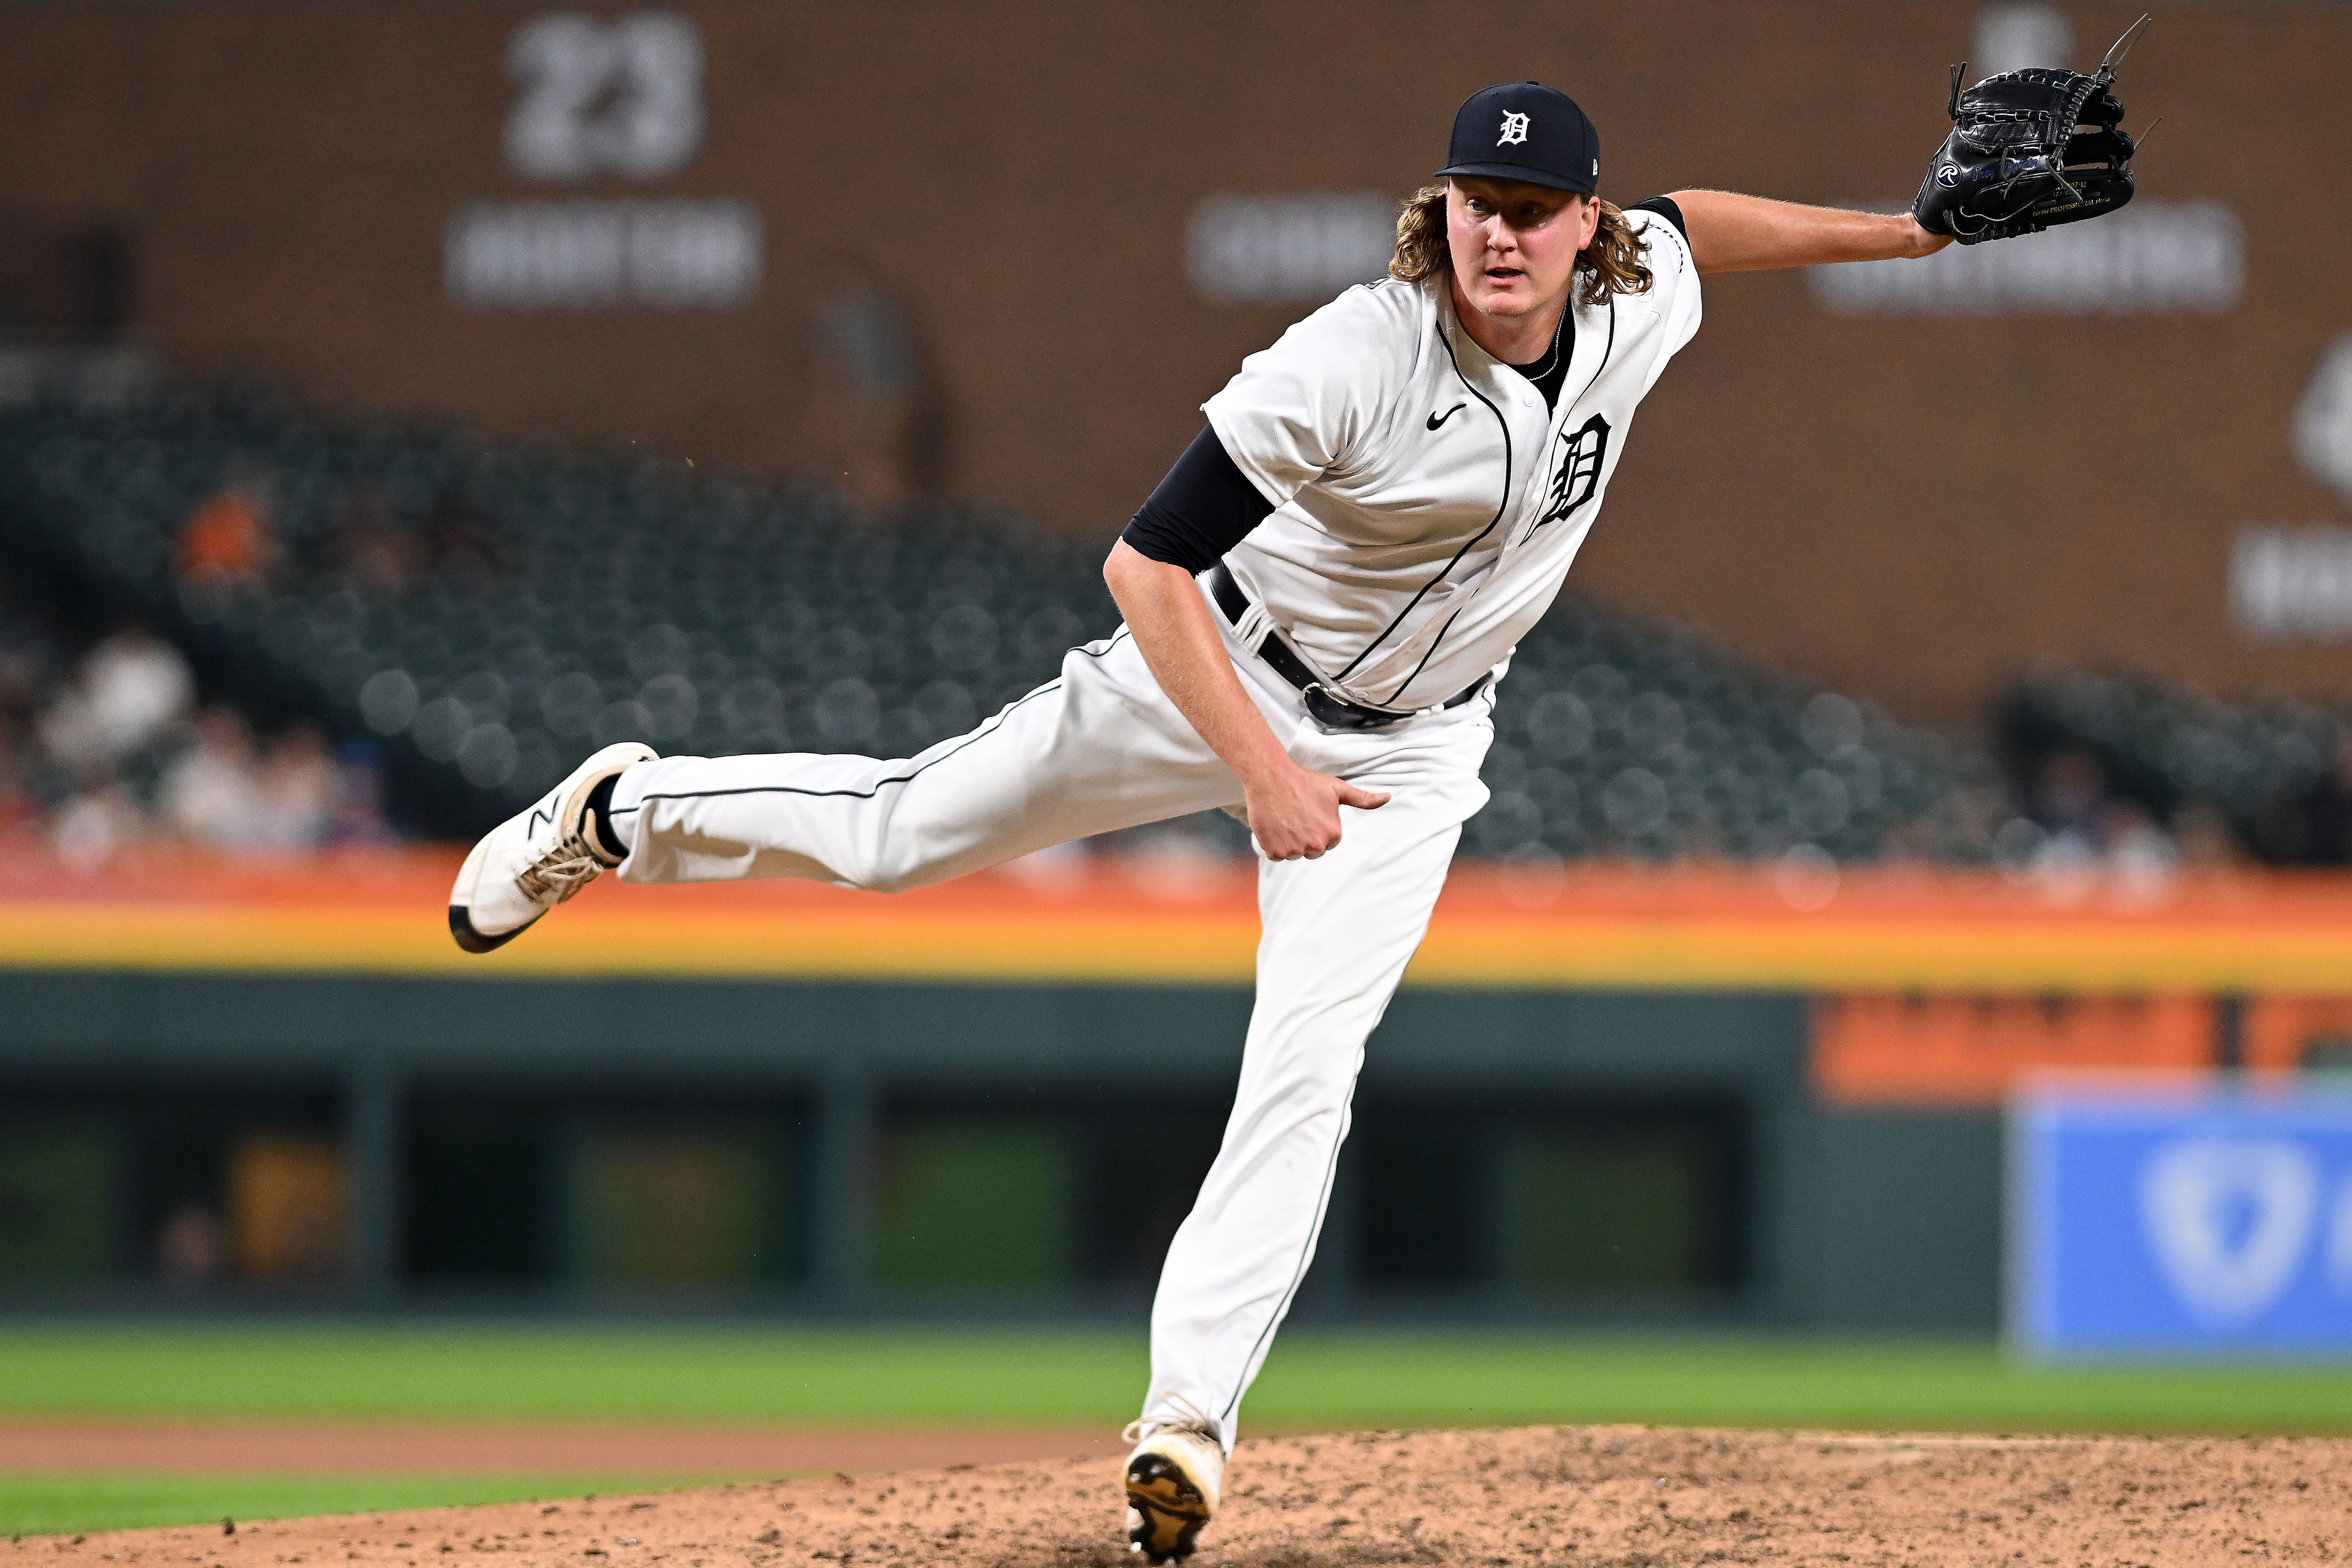 Spencer Torkelson (2 HRs), Tigers topple Twins